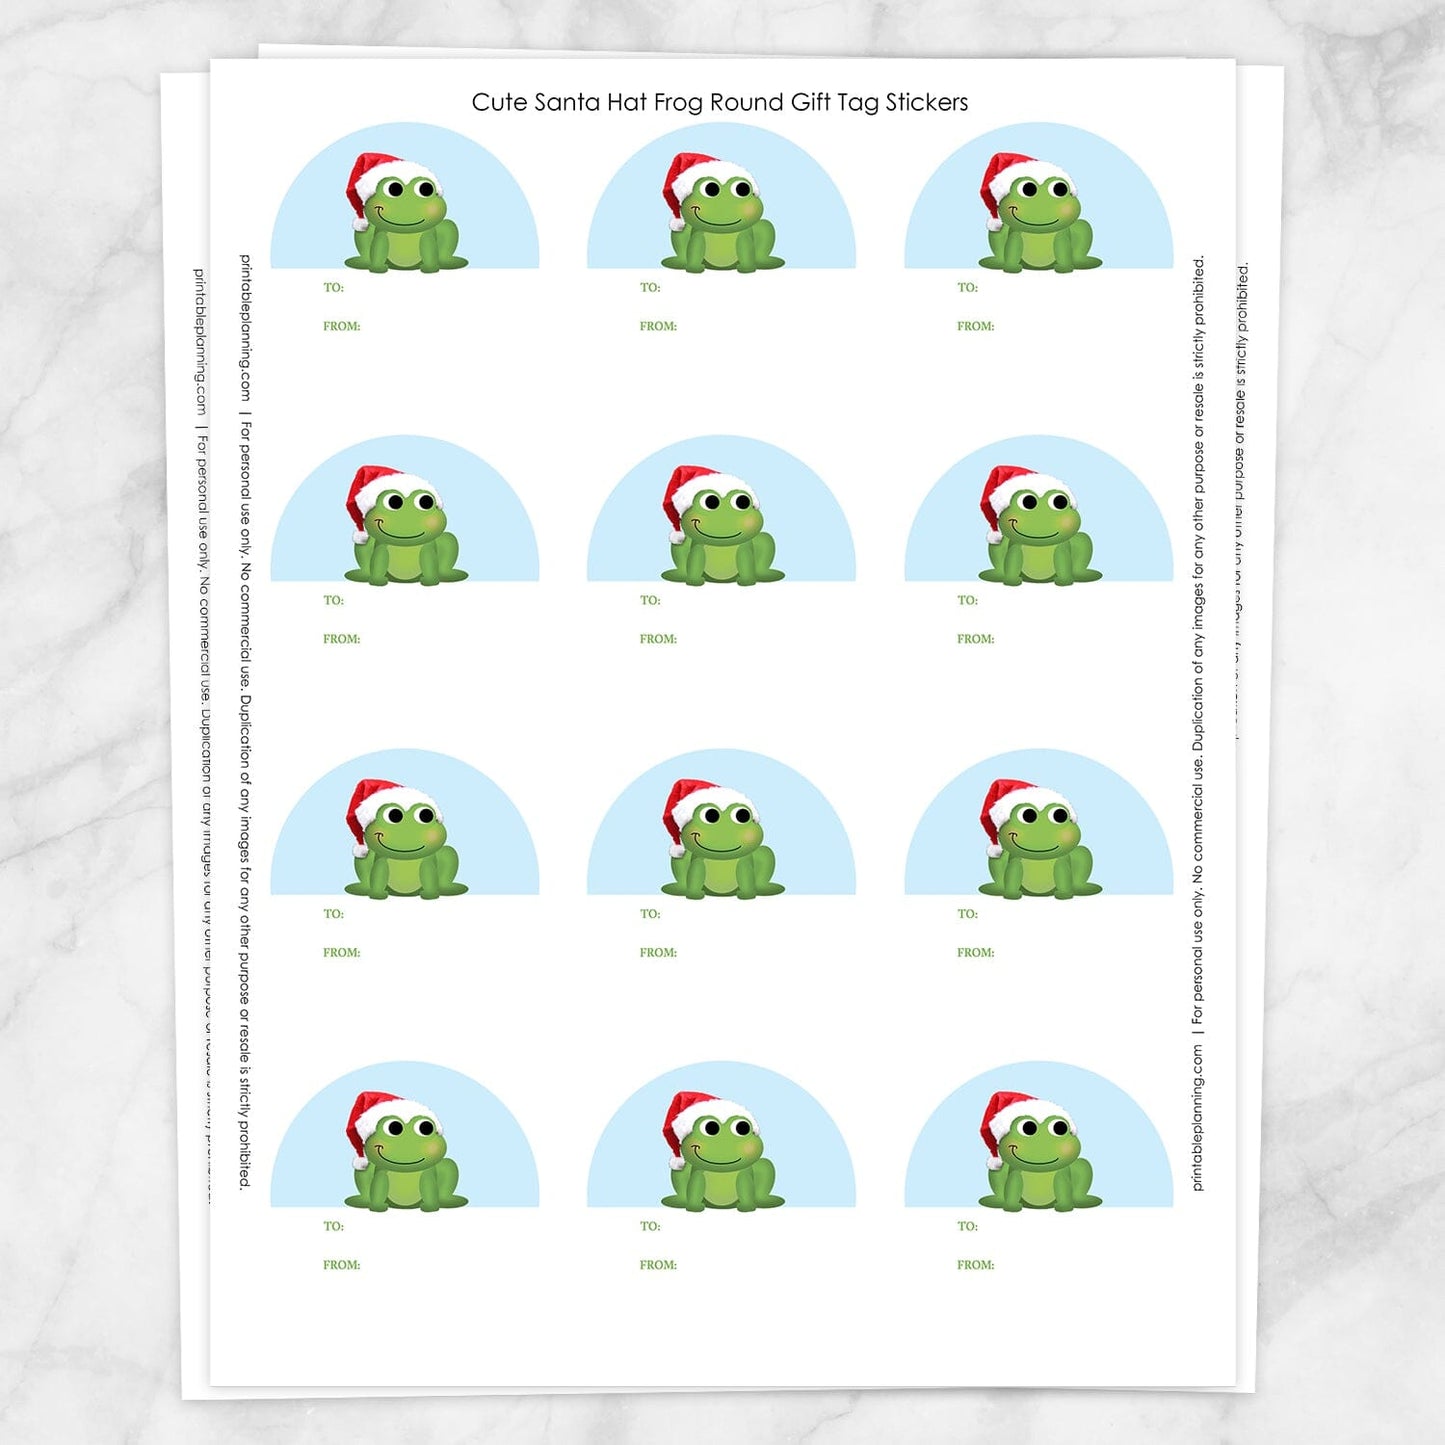 Printable Cute Santa Hat Frog Gift Tag Stickers at Printable Planning. Sheet of 12 stickers.